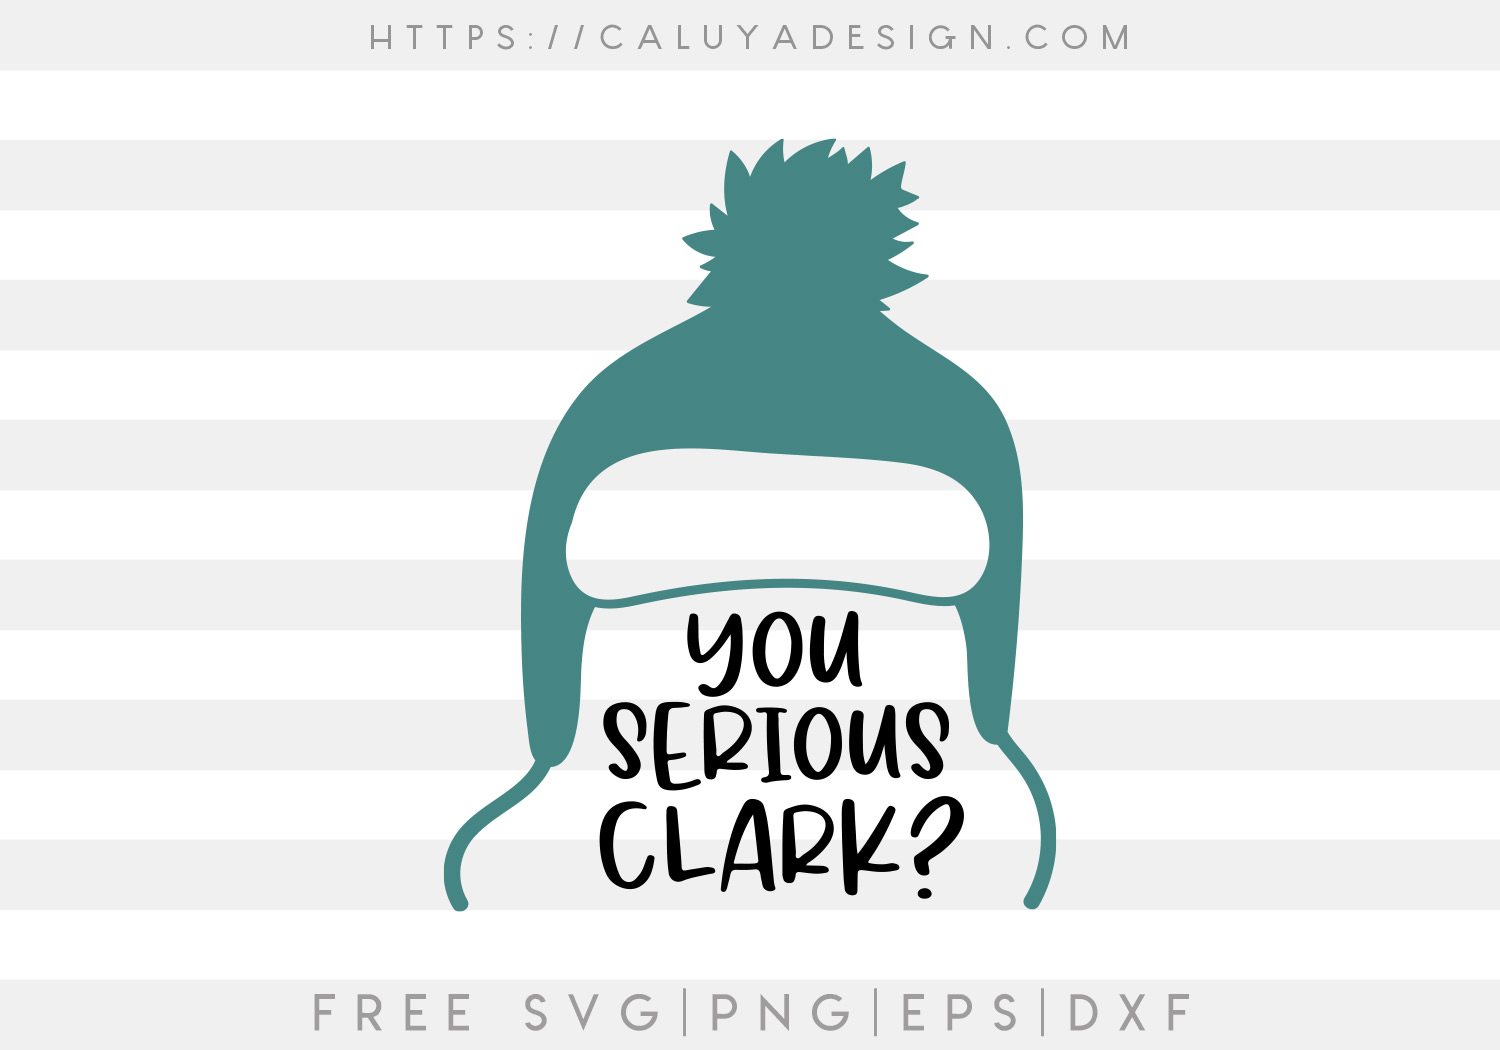 You Serious Clark 2 SVG, PNG, EPS & DXF